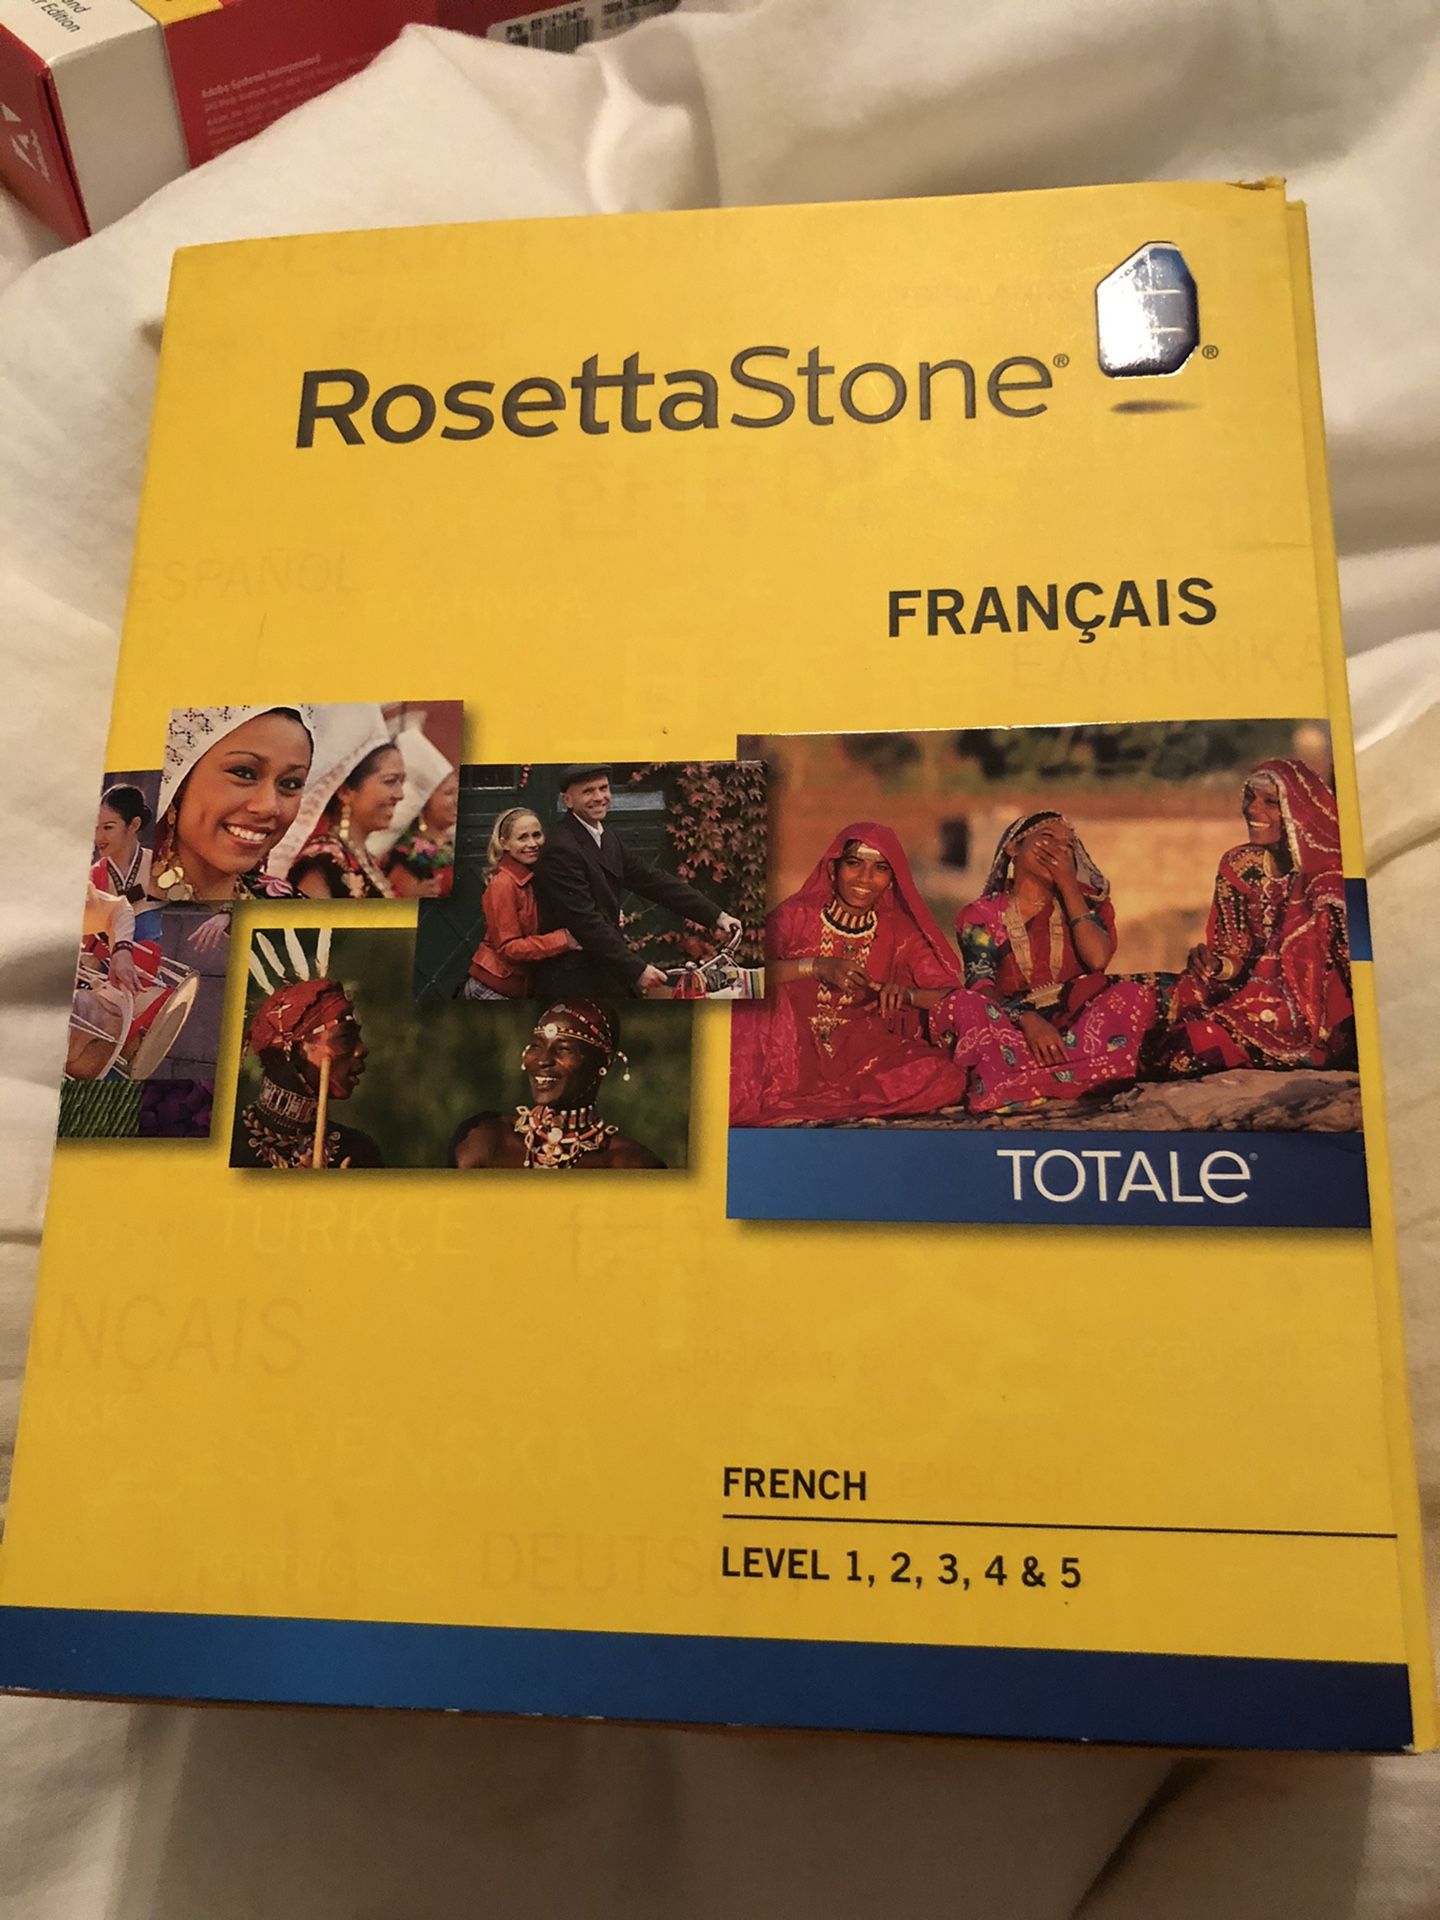 New box french ROSETTA STONE language learning teaching tool computer-based software totale level 1, 2, 3, 4 & 5 francais